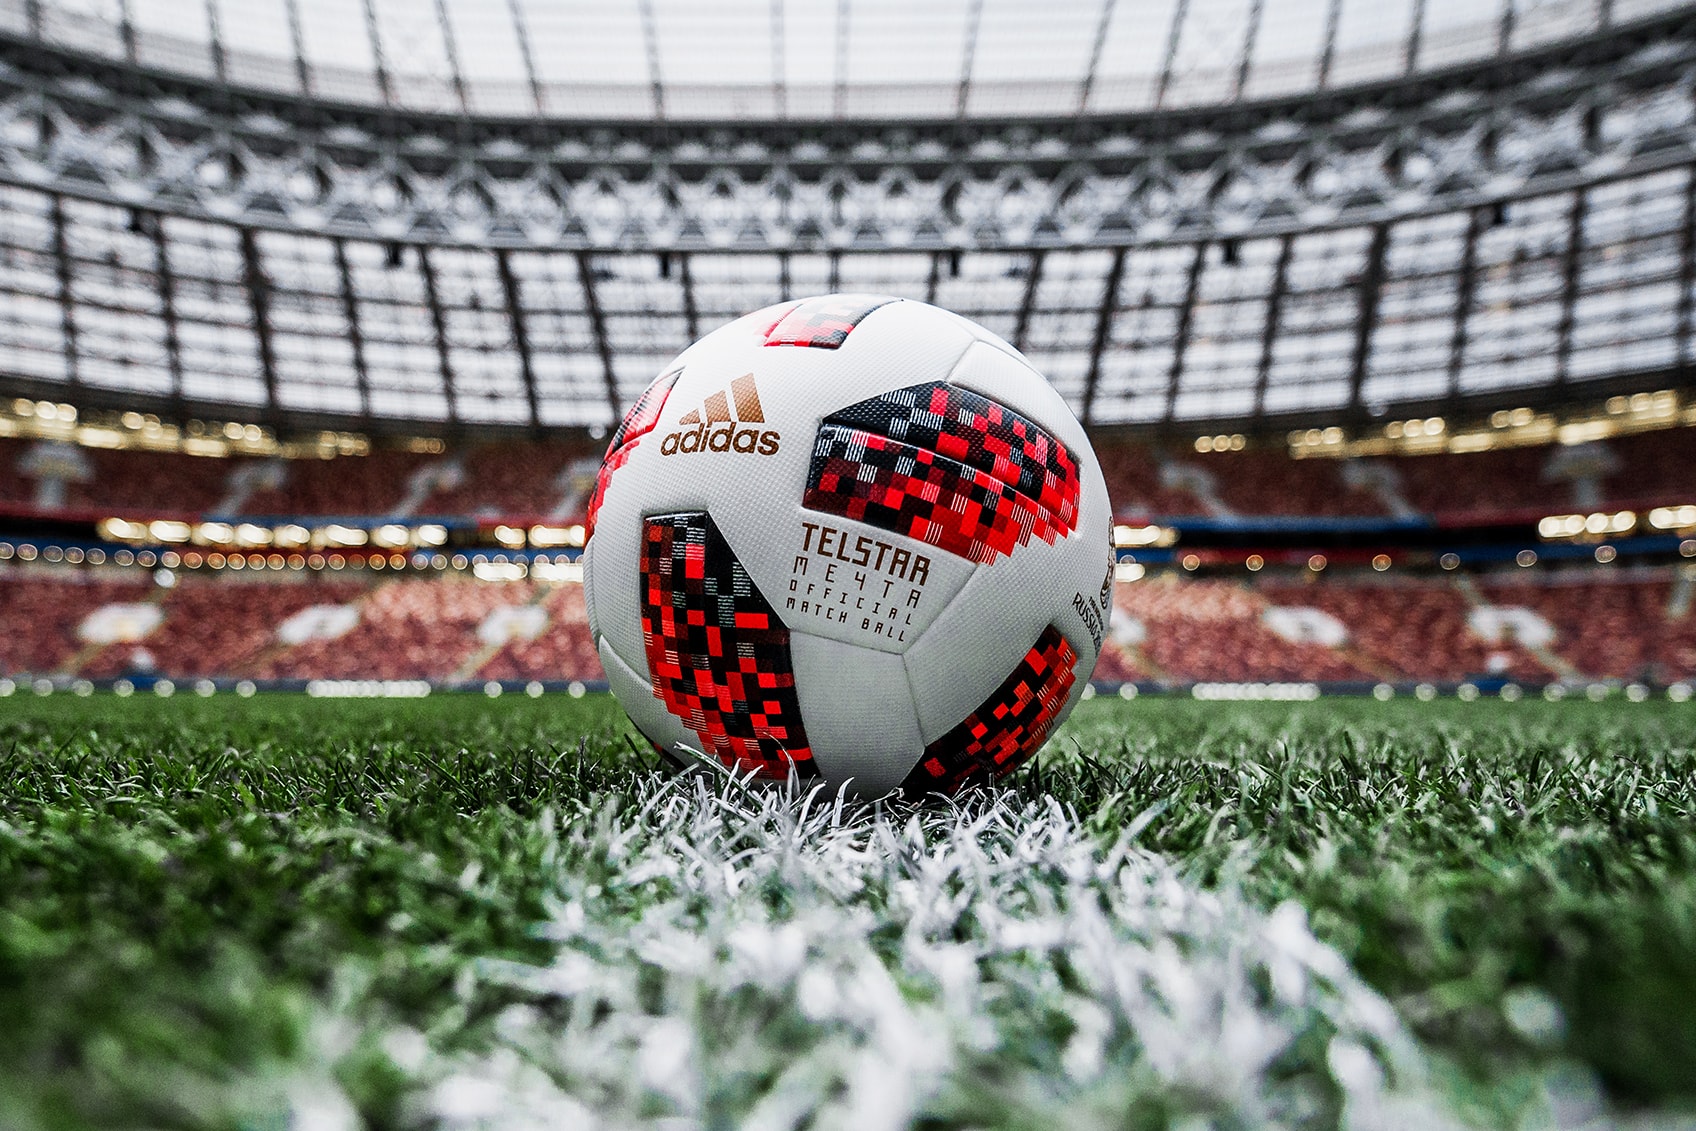 adidas Football 2018 FIFA World Cup Knockout Stage Ball Sports Moscow 26 June Telstar Mechta Dream Ambition Russia